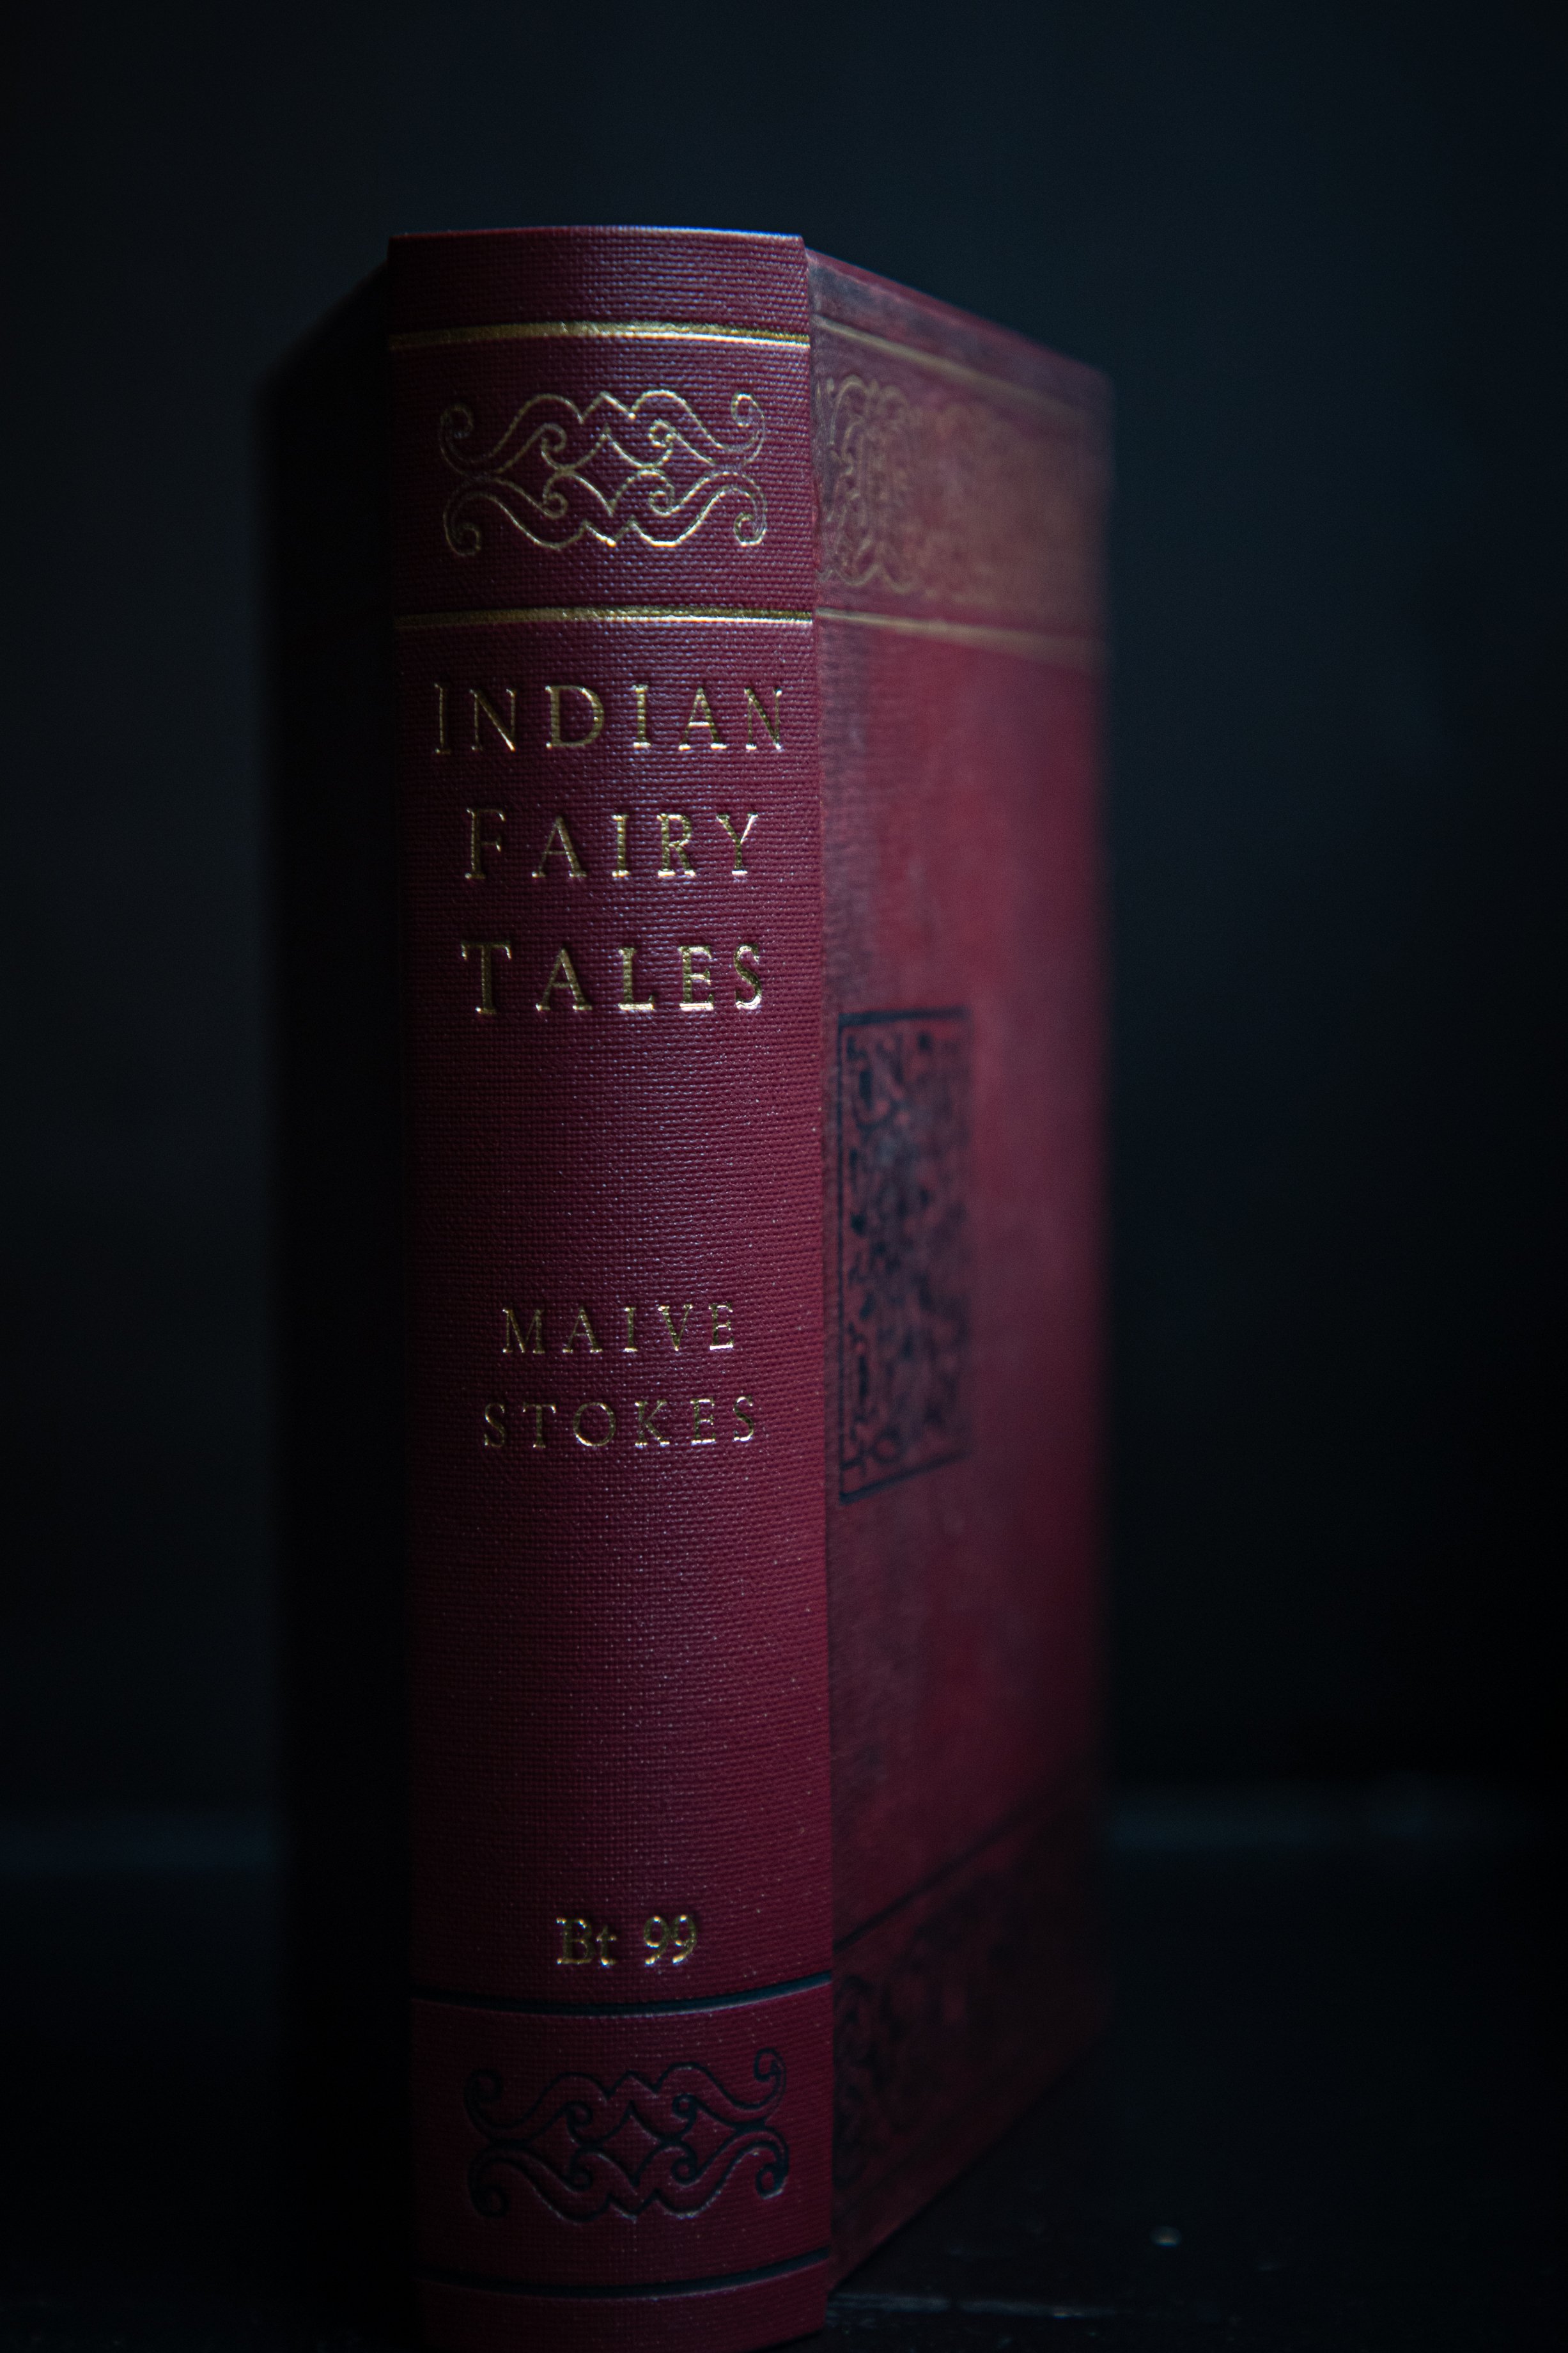 Indian Fairytales spine title close up 2.jpg